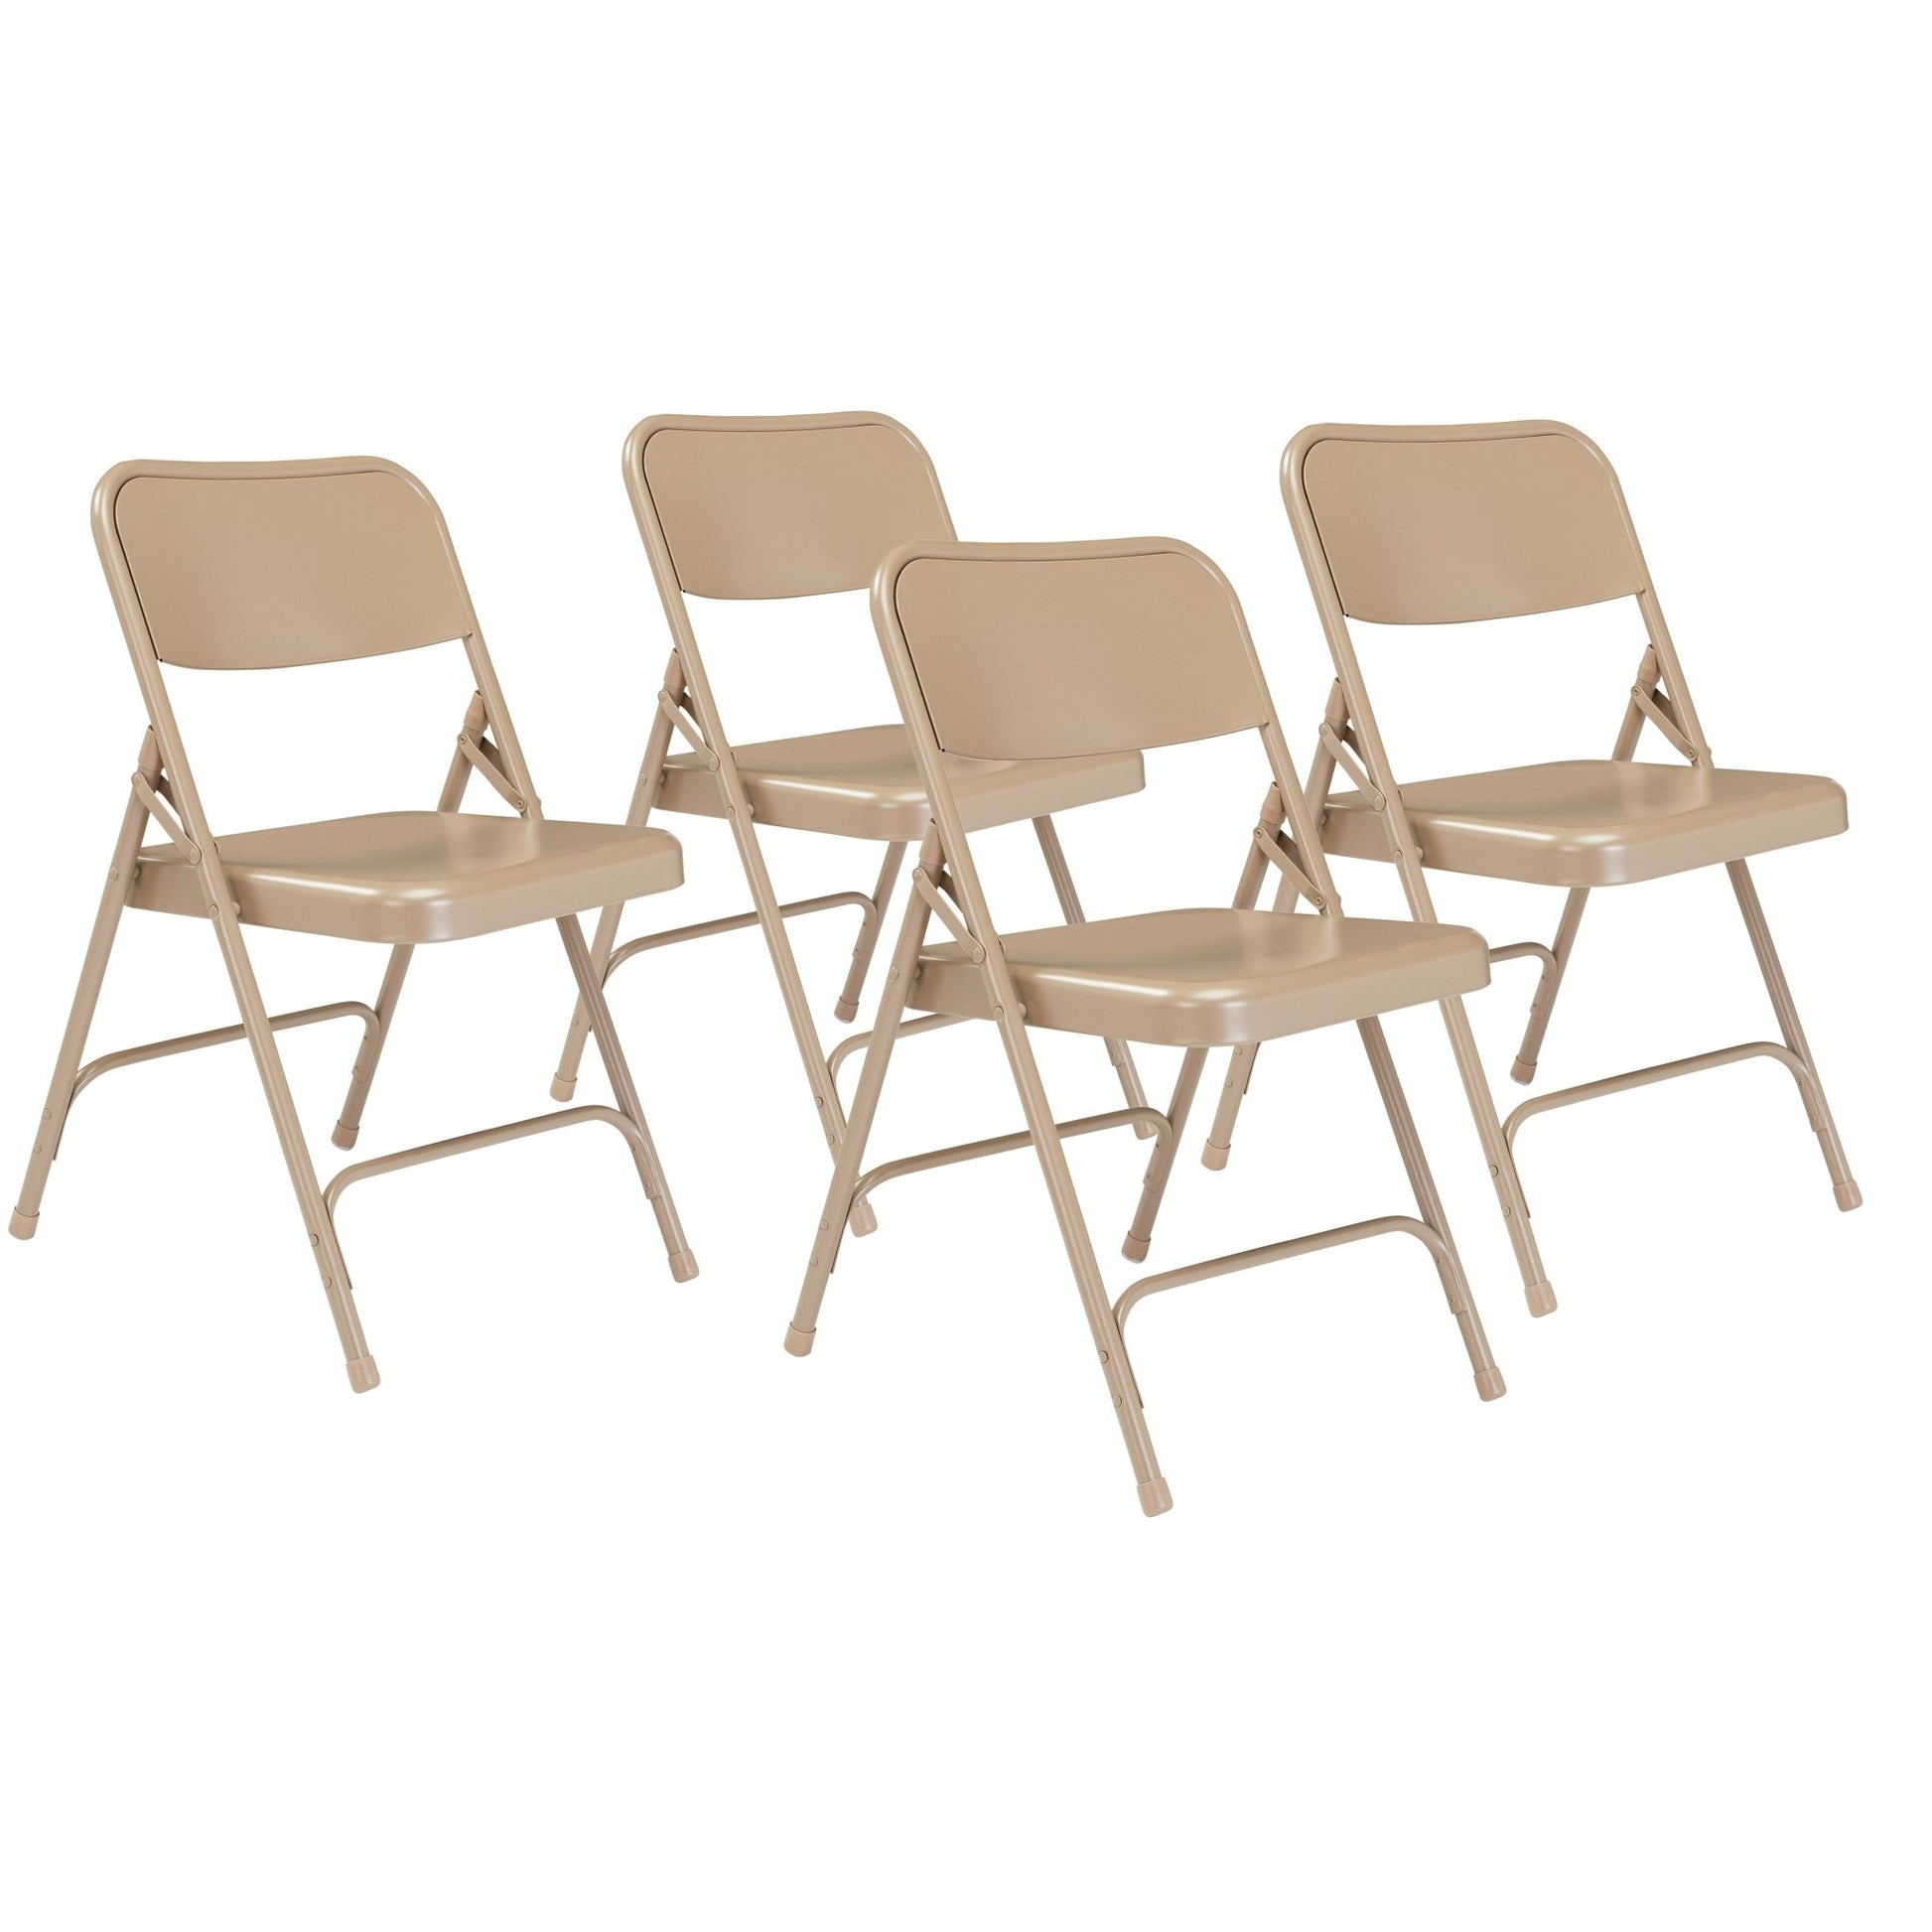 NPS 200 Series Premium All Steel Folding Chair (National Public Seating NPS-200) - SchoolOutlet